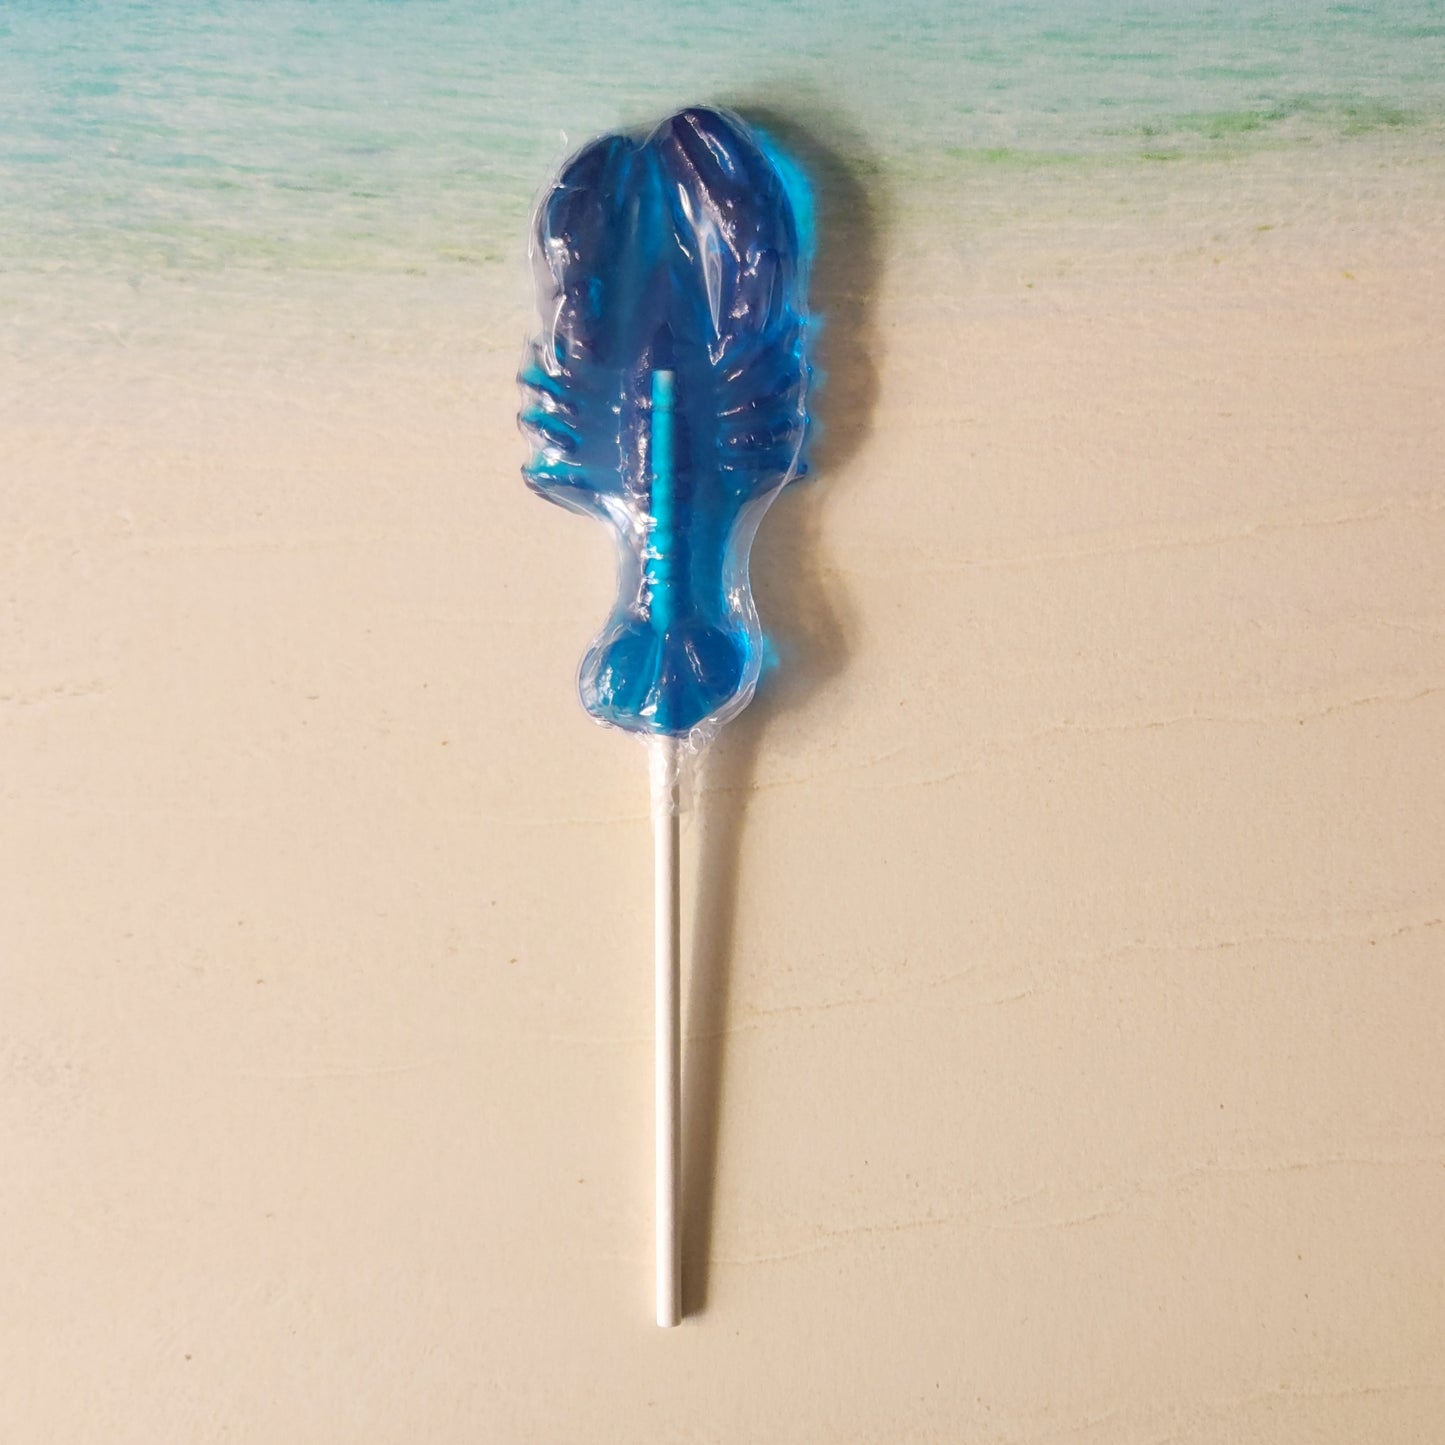 Blue raspberry flavored hard candy pop in the shape of a lobster.